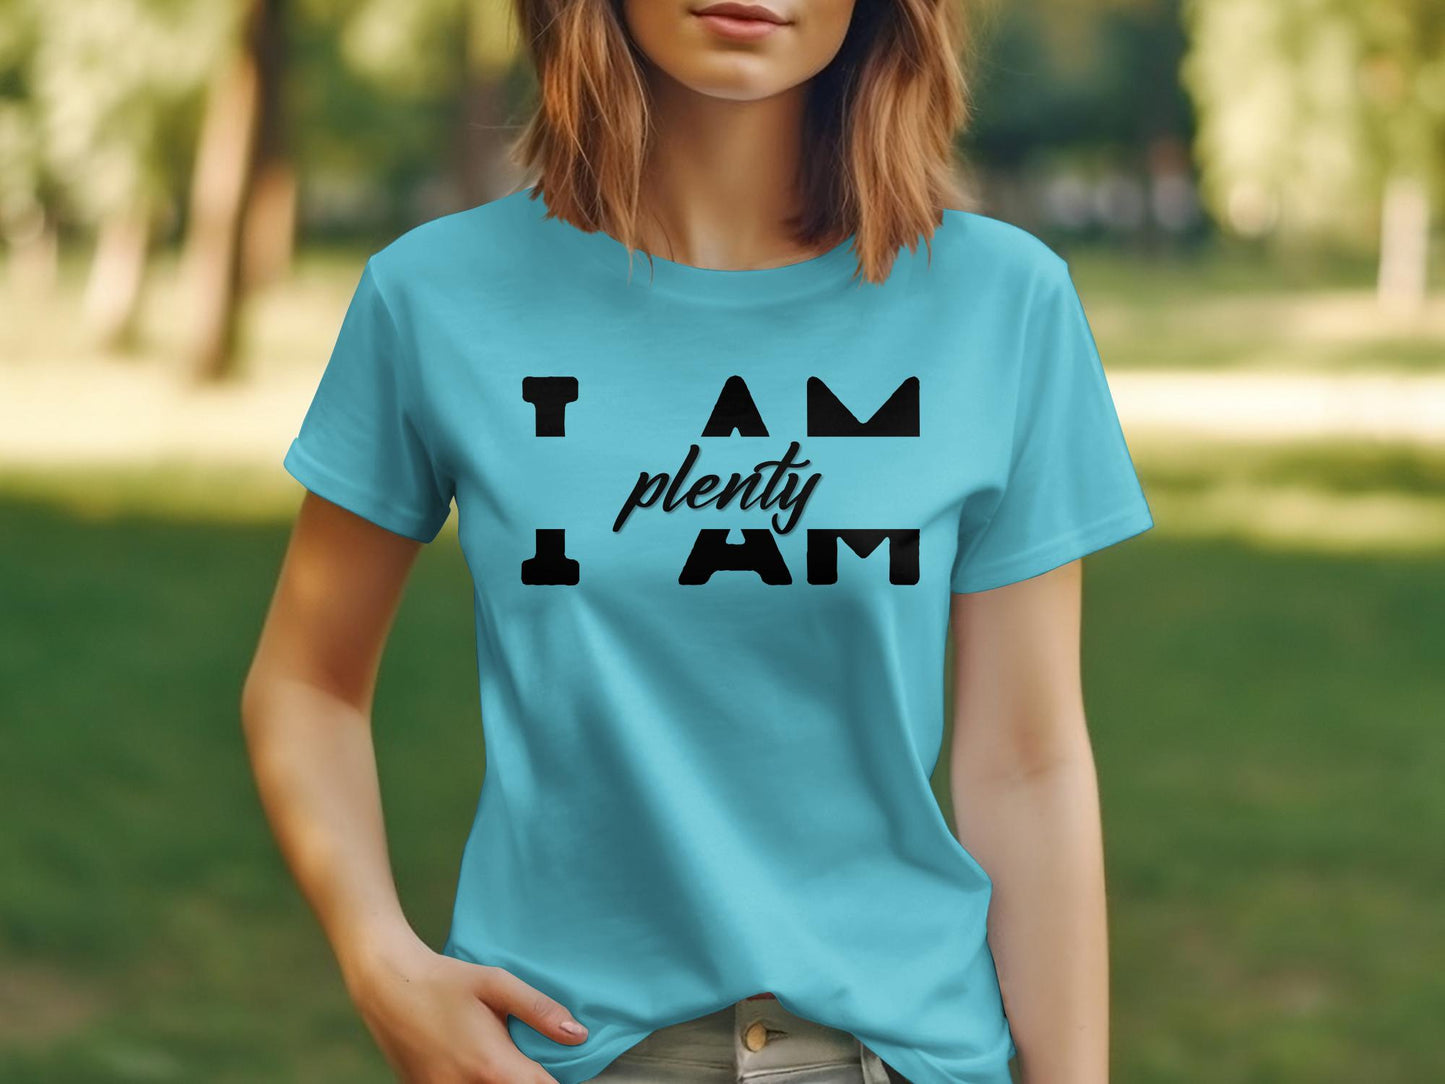 I Am Plenty - An encouraging and motivating Affirmation Quote T-shirt